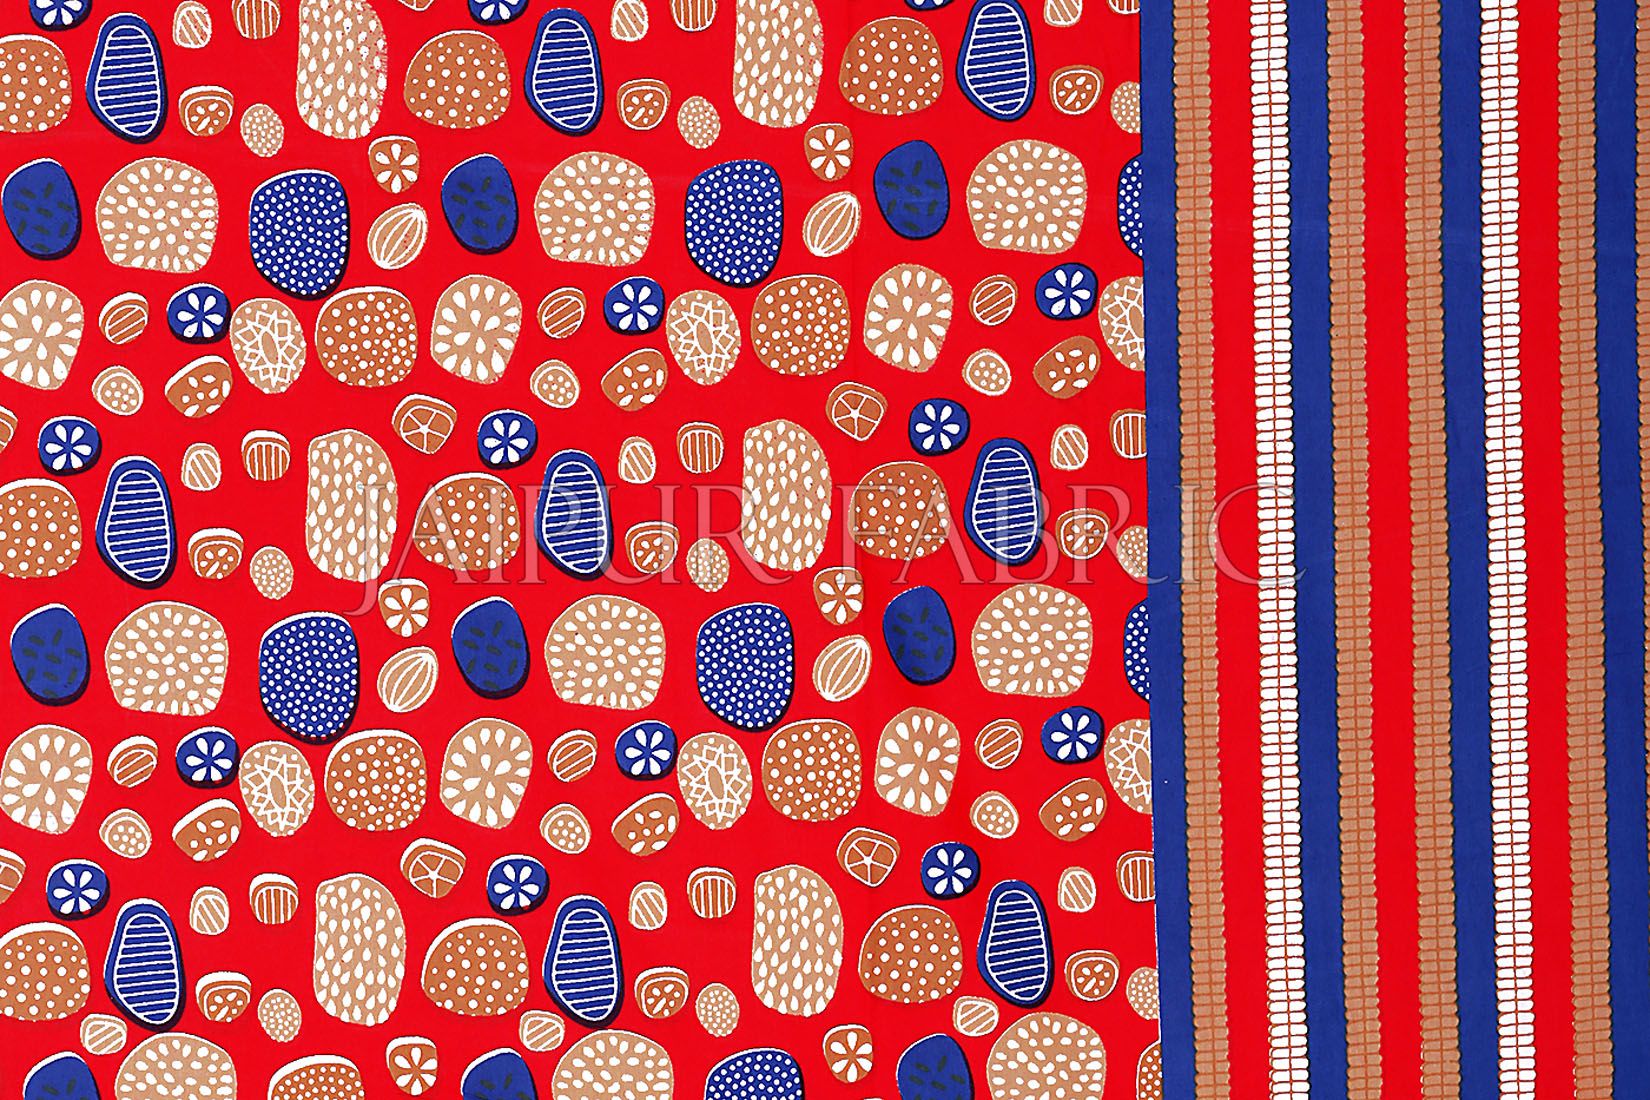 Red Border Multi Color Stone Pattern Screen Print Cotton Double Bed Sheet